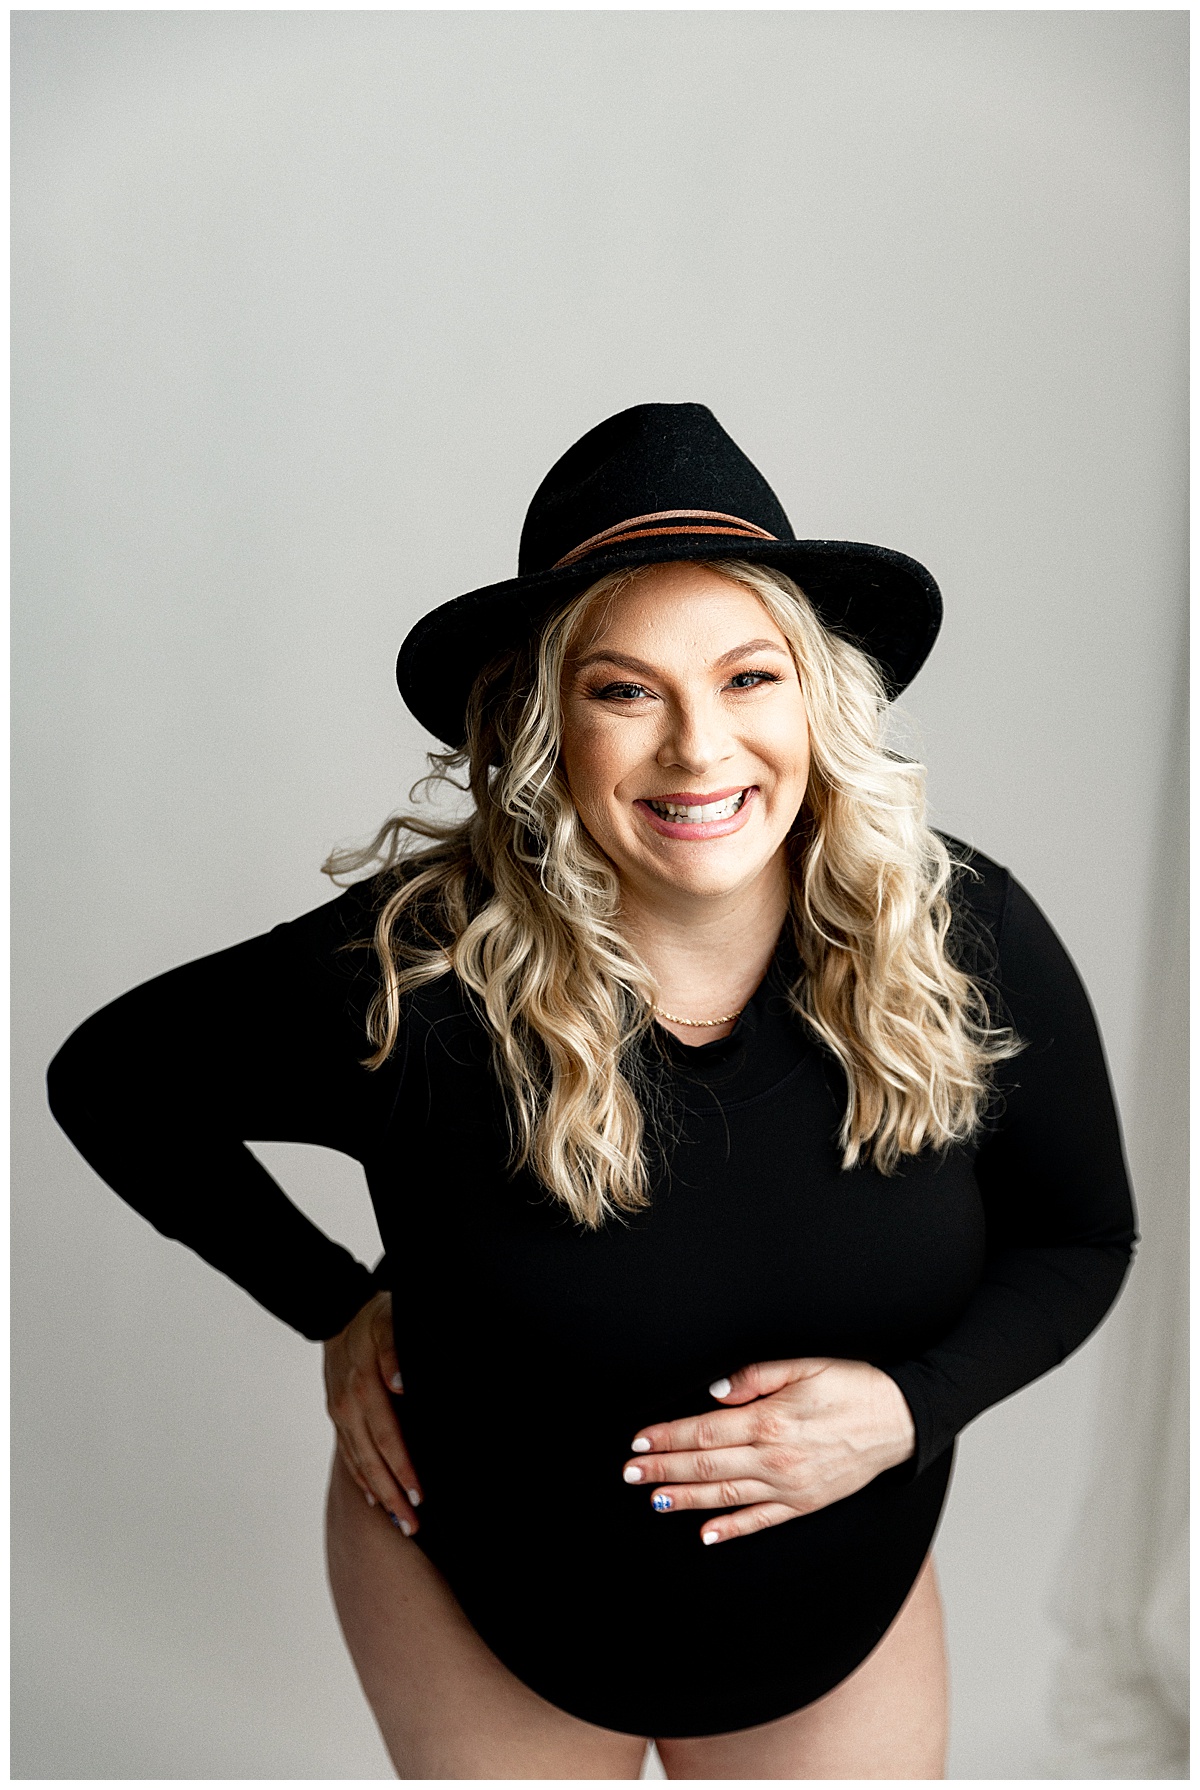 Woman wears black hat and outfit for IVF Maternity Session.